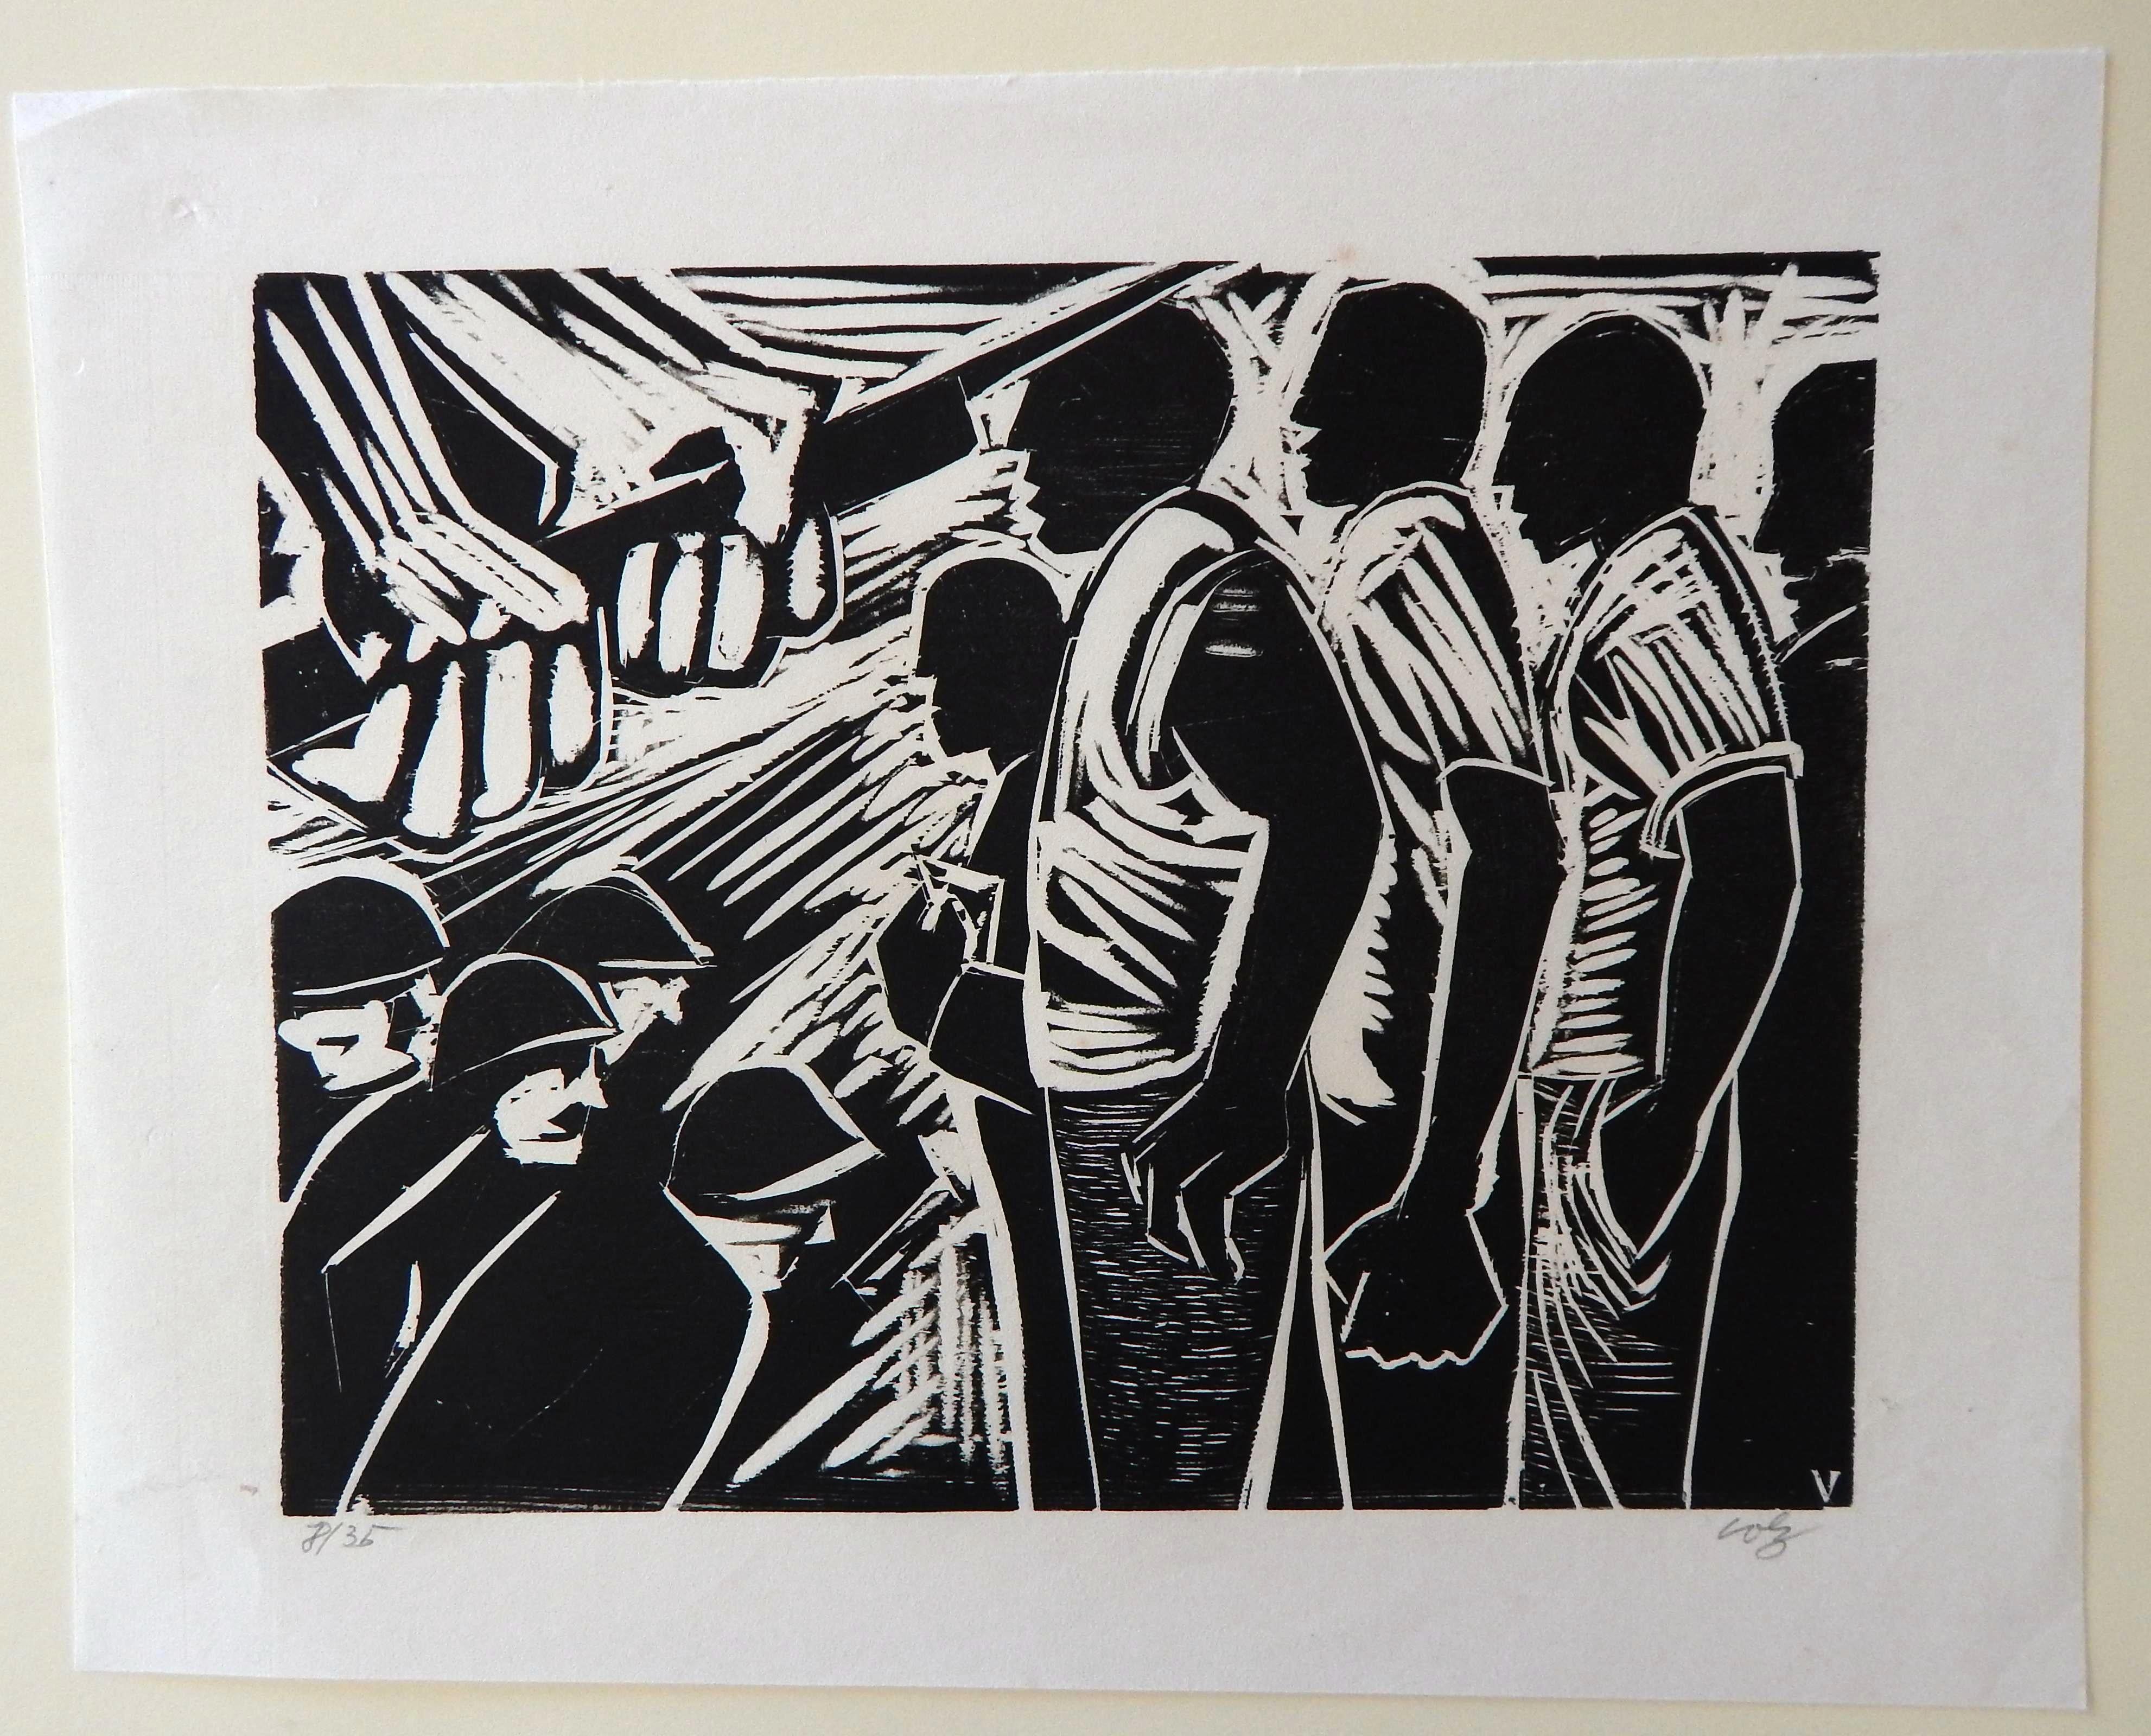 An original woodcut print depicting the social unrest of the 1960s by Herman Roderick Volz. 
Pencil signed by the artist lower right. Image measures 11 1/2